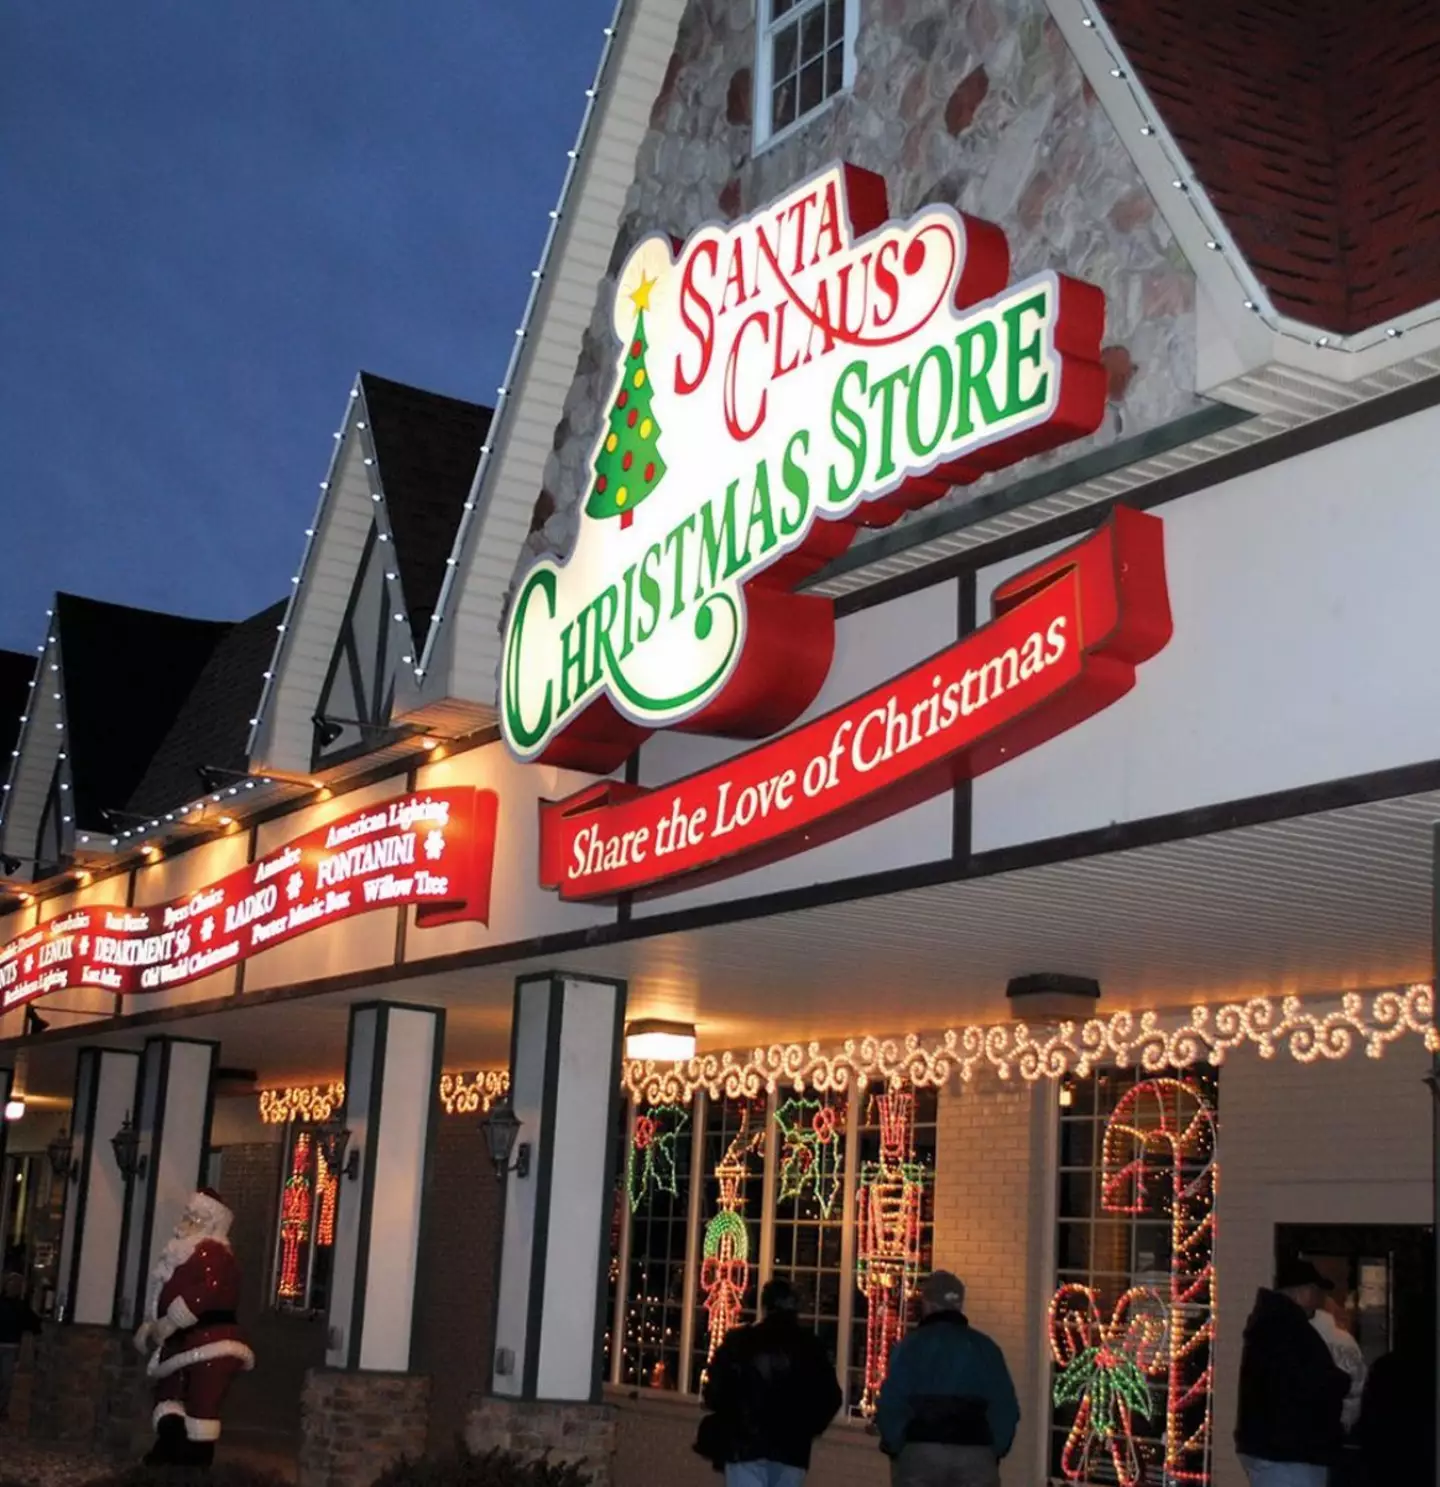 The town boasts their own Christmas shop (